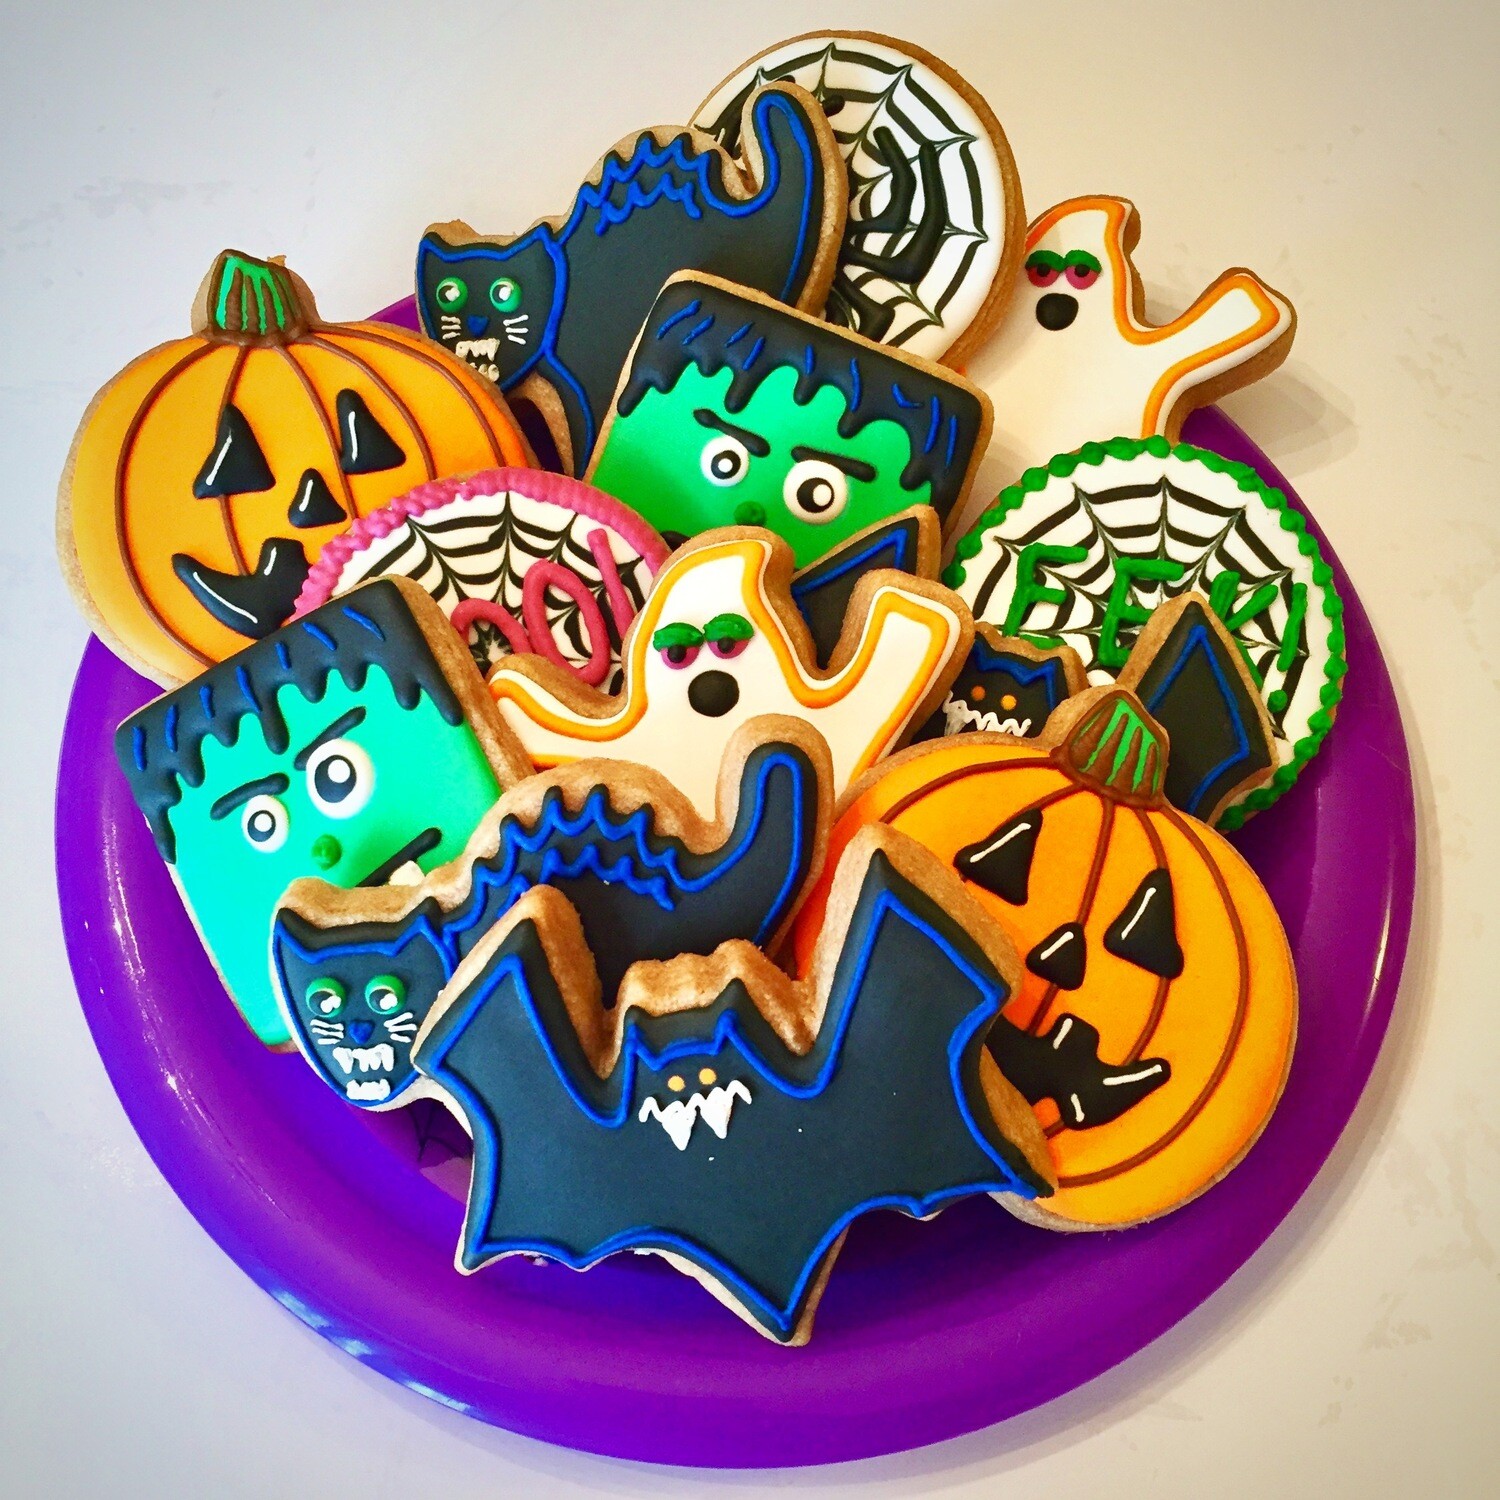 'Halloween Decorating Workshop - THURSDAY, OCTOBER 29th at 6:30 p.m. (THE COOKIE DECORATING STUDIO)